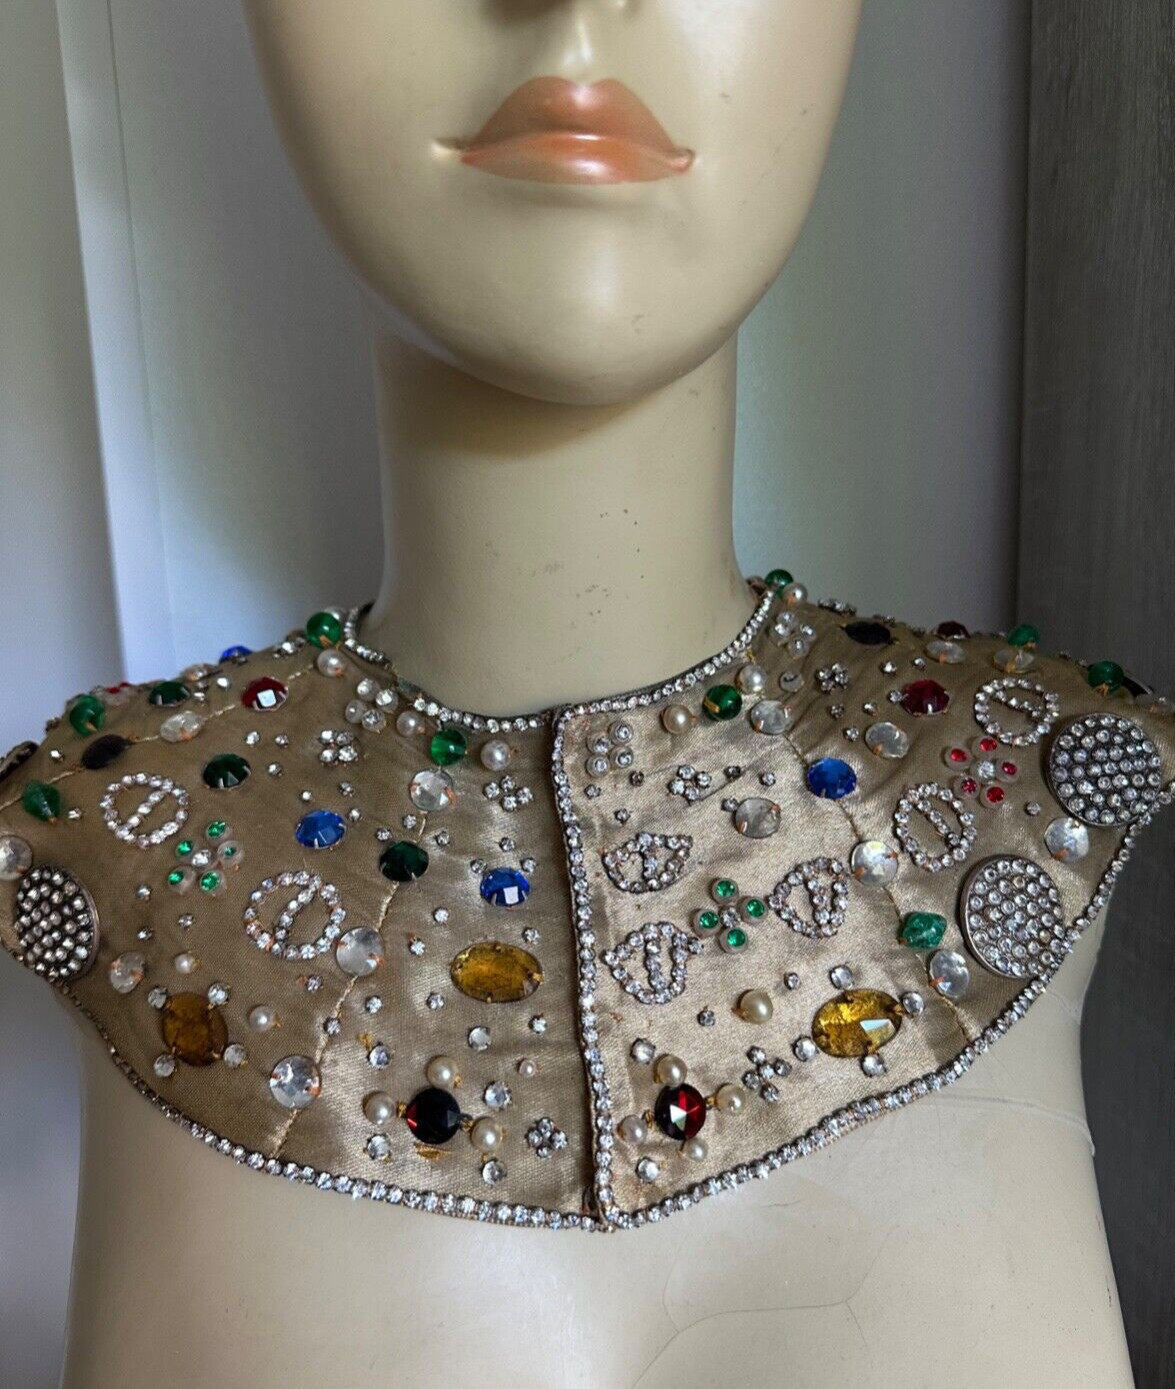 Rare & Magnificent 1950s Collar worn by the French model Denise SARRAULT